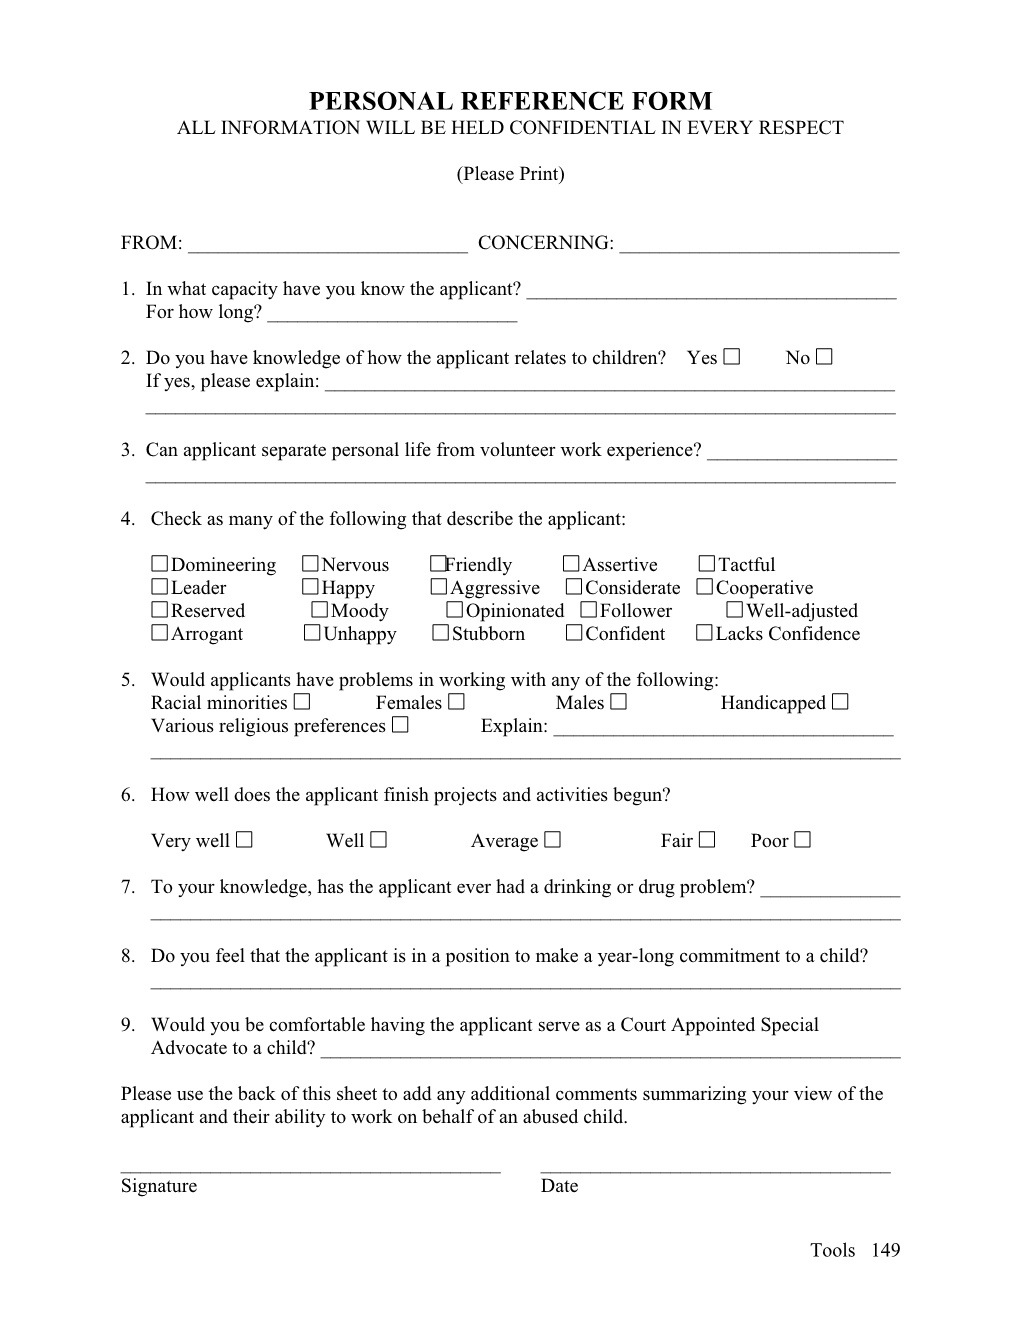 Sample Personal Reference Form